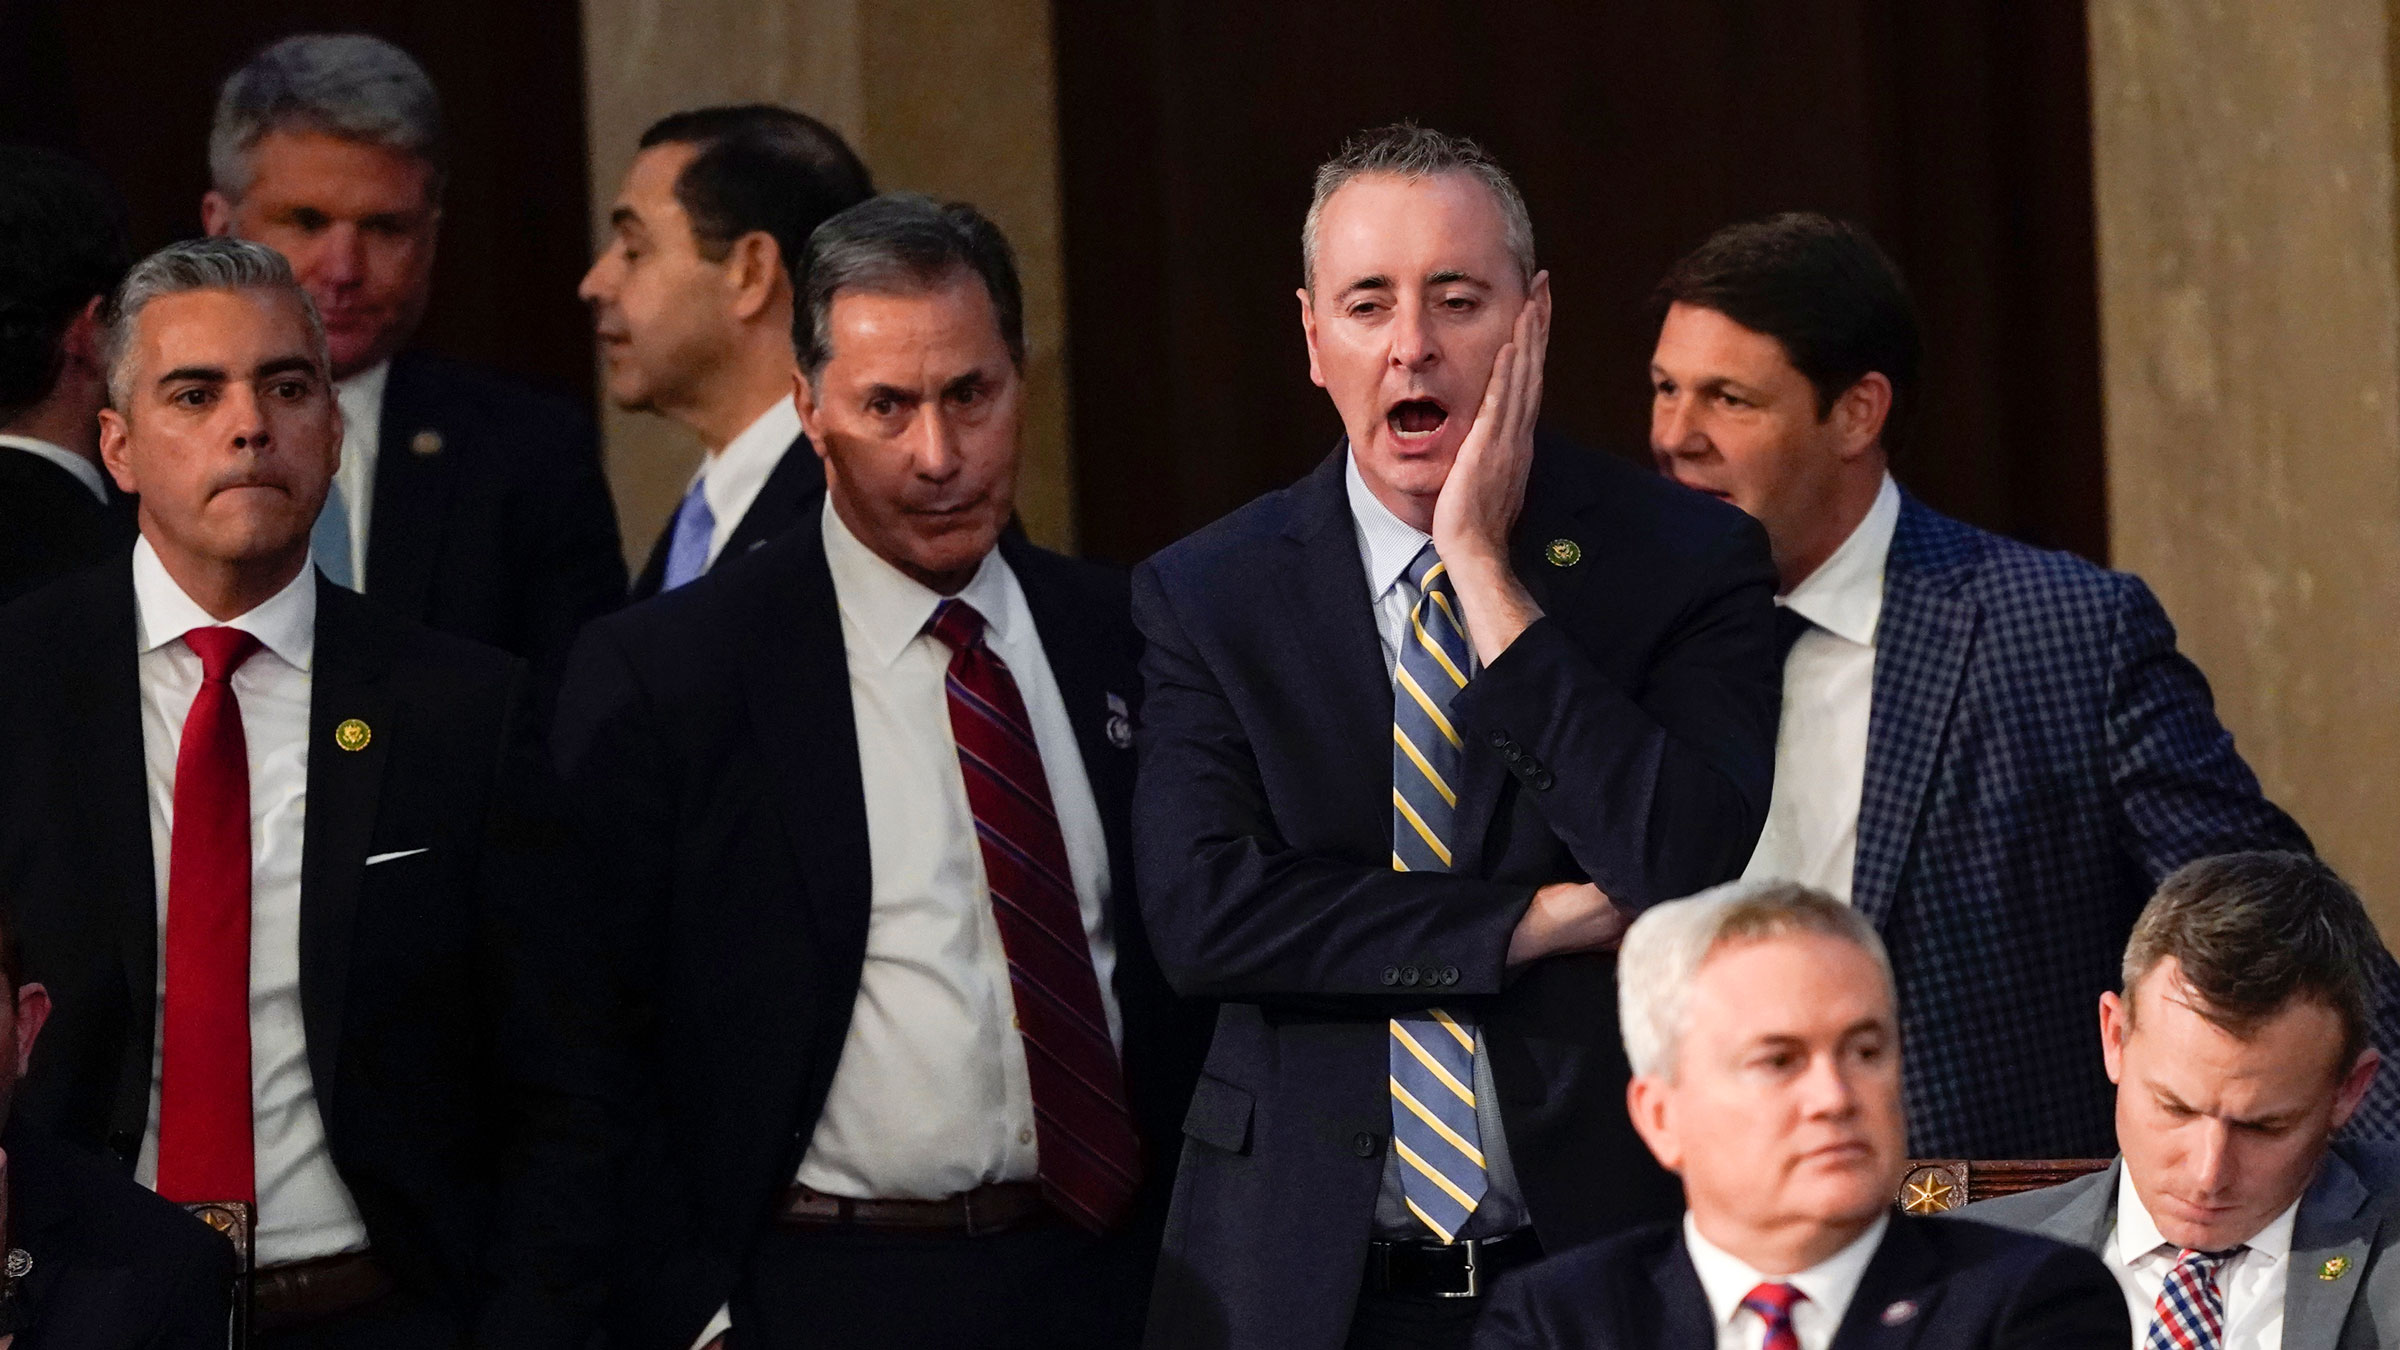 US Rep. Brian Fitzpatrick, a Republican from Pennsylvania., yawns after the third round of votes Tuesday.